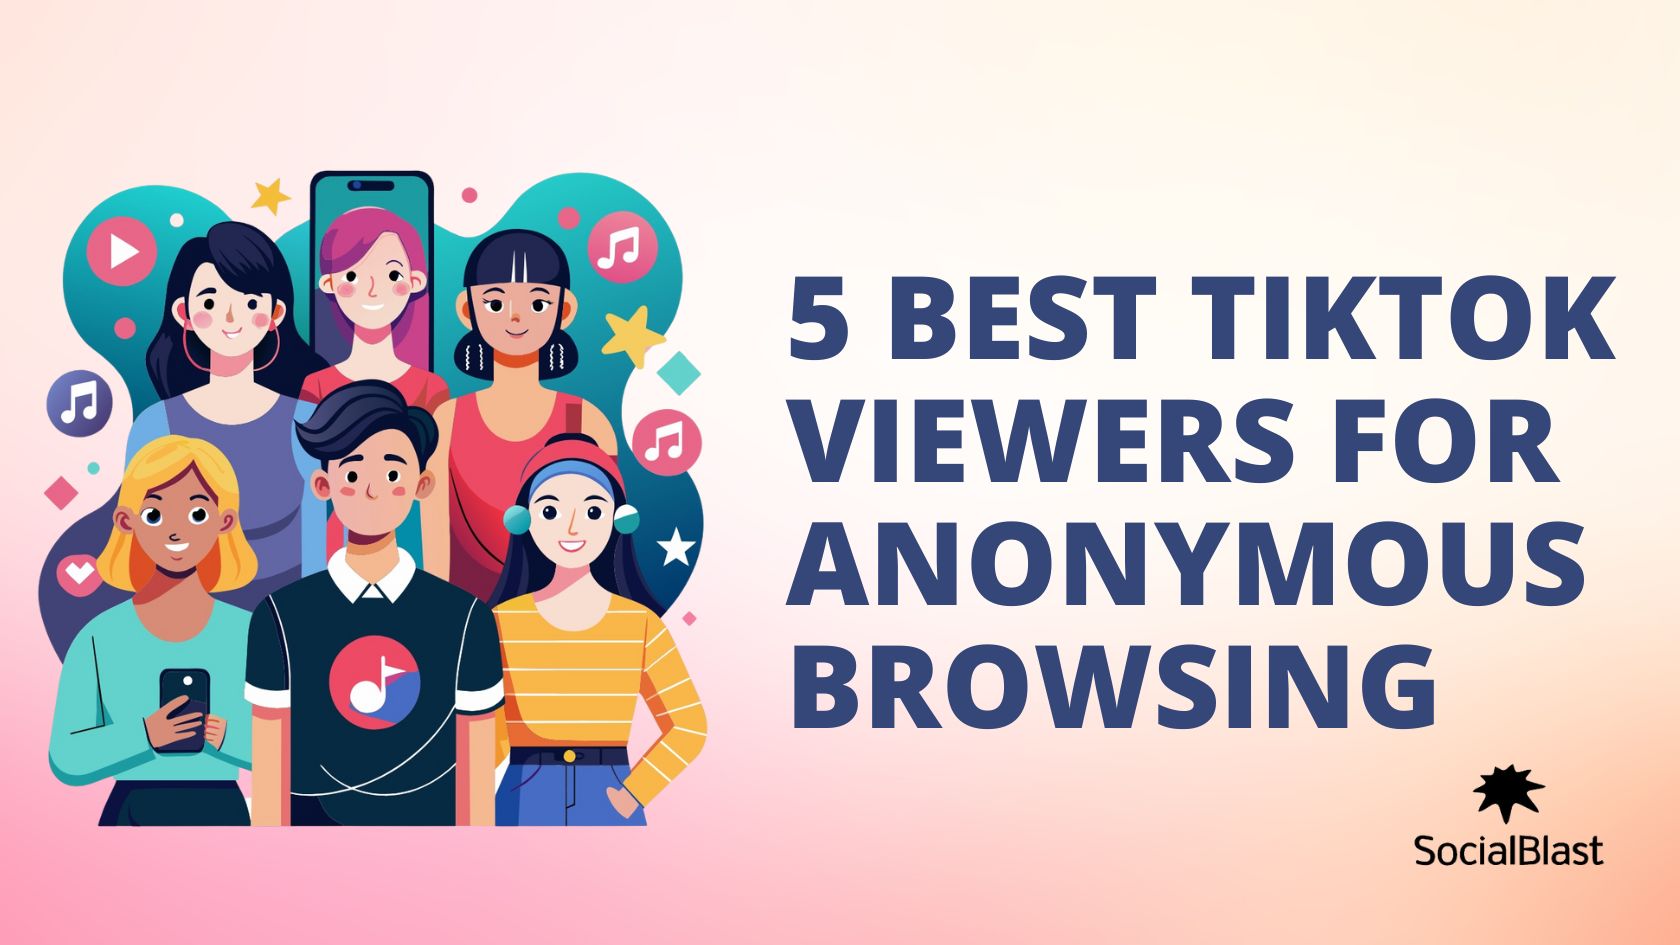 5 best TikTok viewers for anonymous browsing